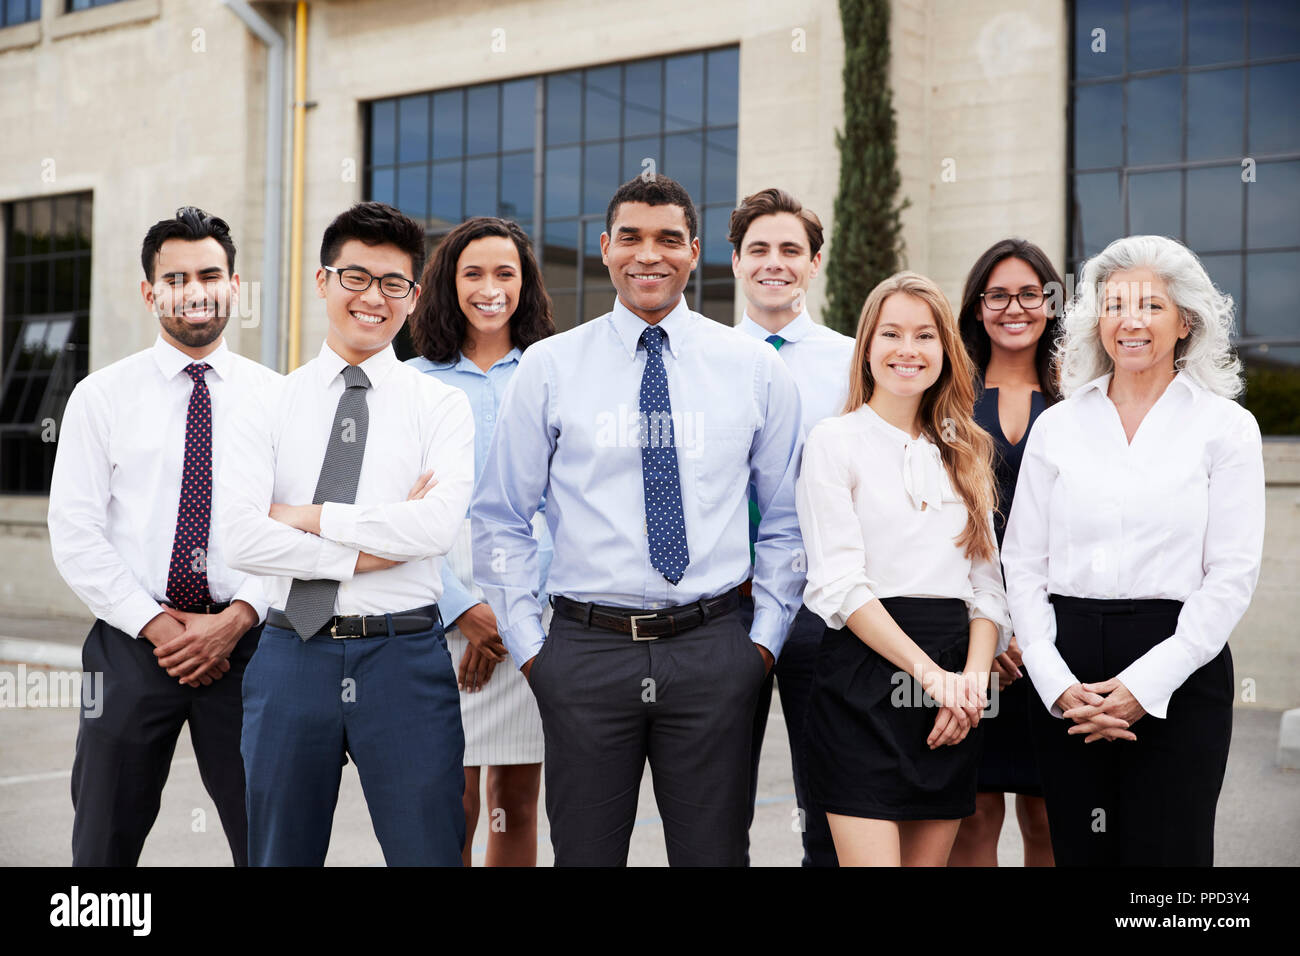 Mixed race businessman and colleagues outdoors, portrait Stock Photo